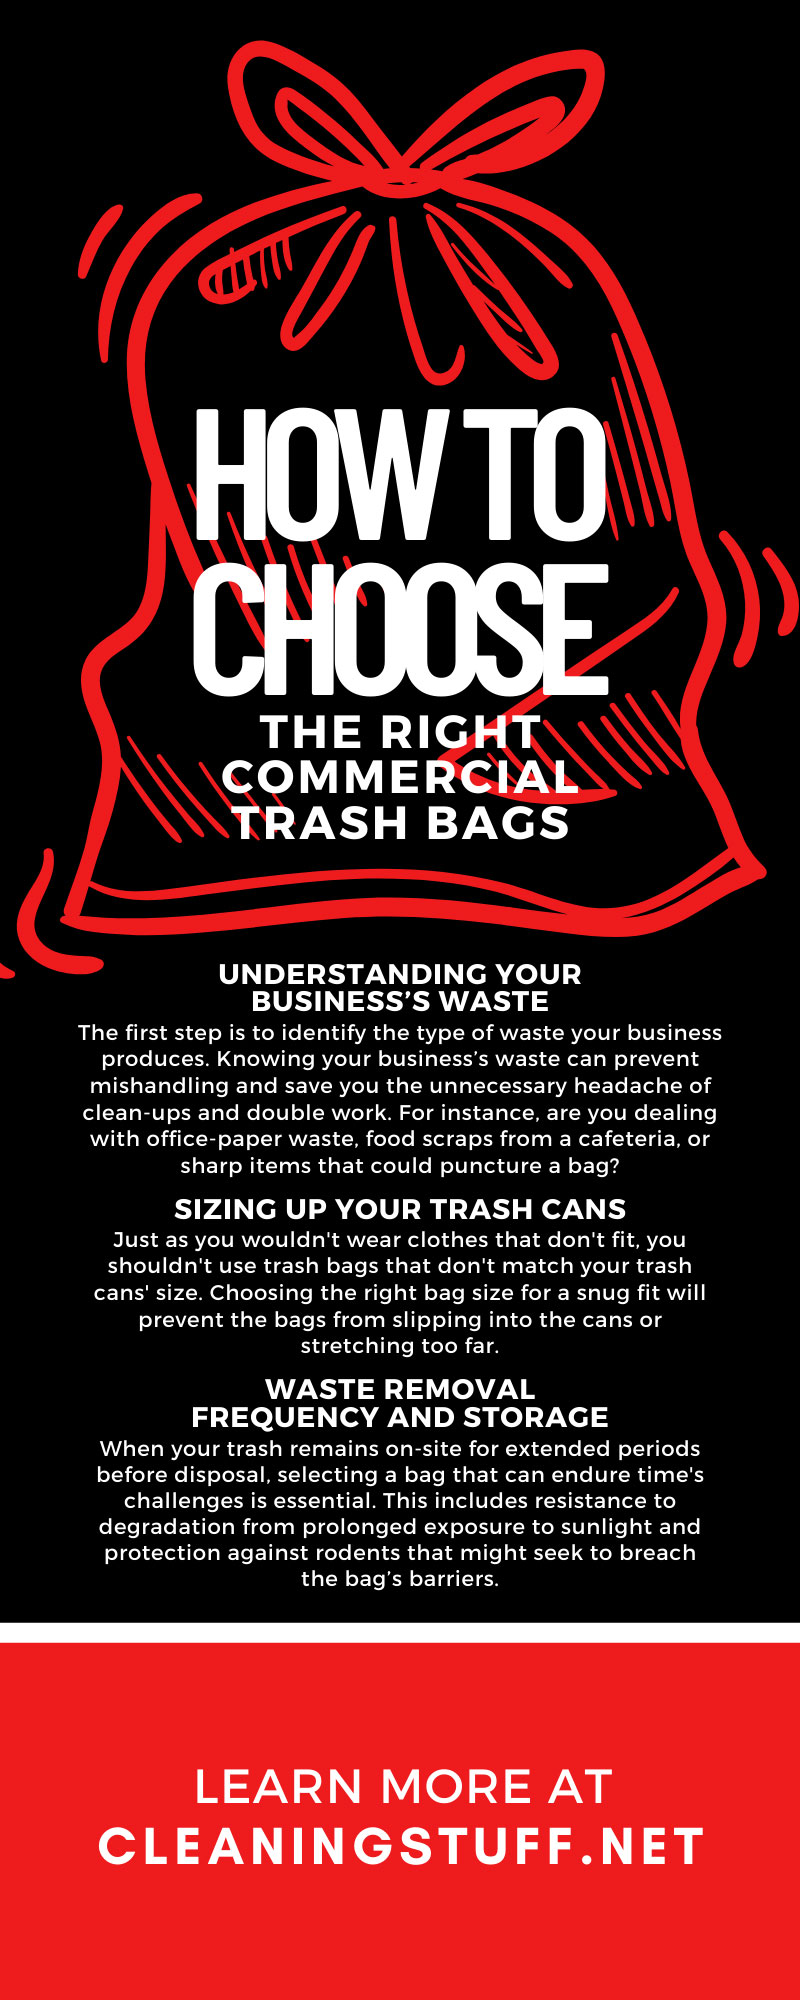 How To Choose the Right Commercial Trash Bags